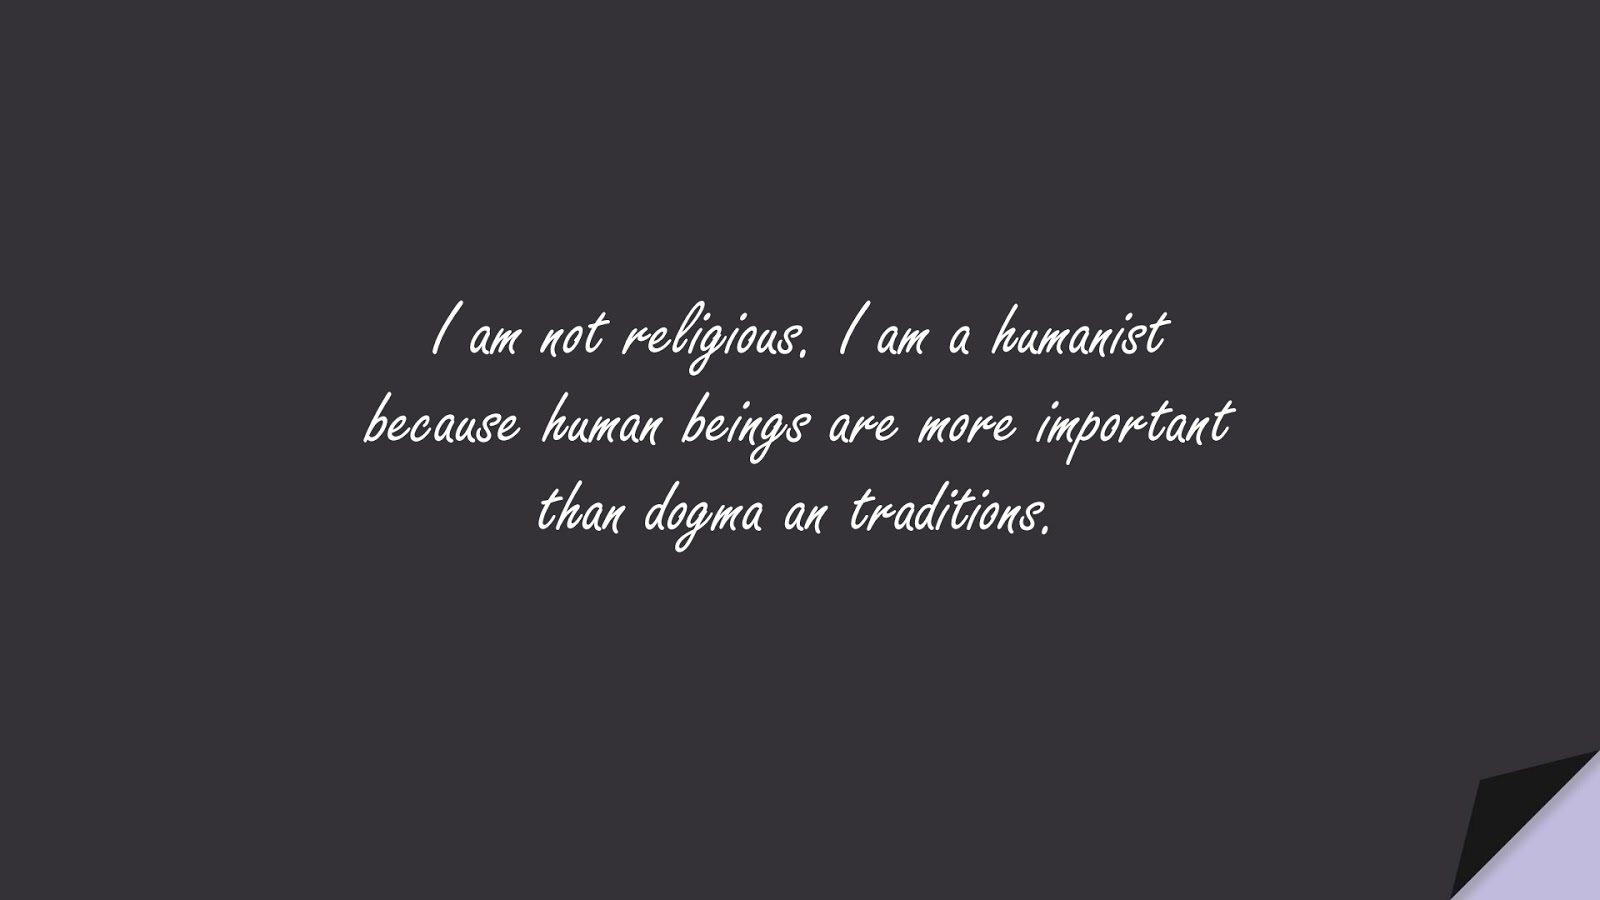 I am not religious. I am a humanist because human beings are more important than dogma an traditions.FALSE